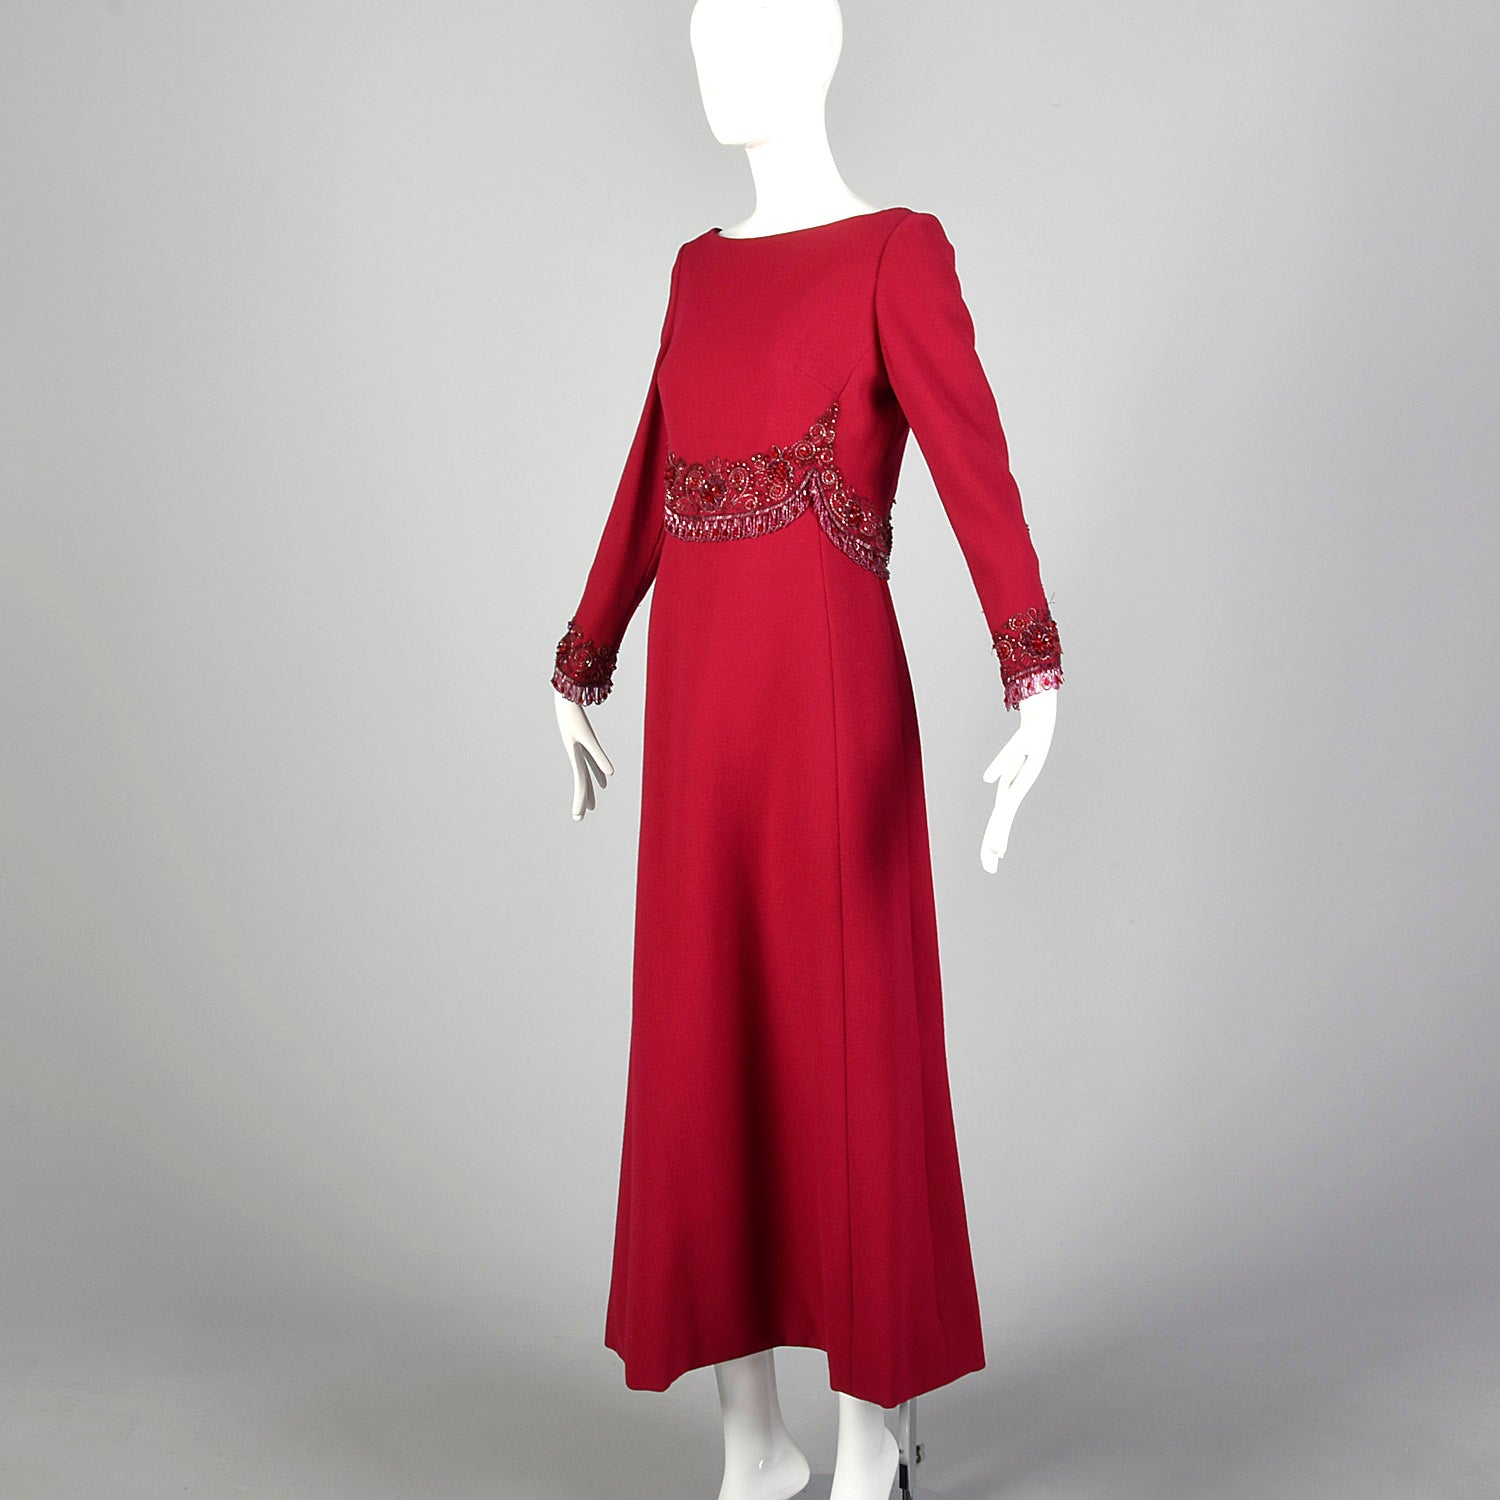 Fiorenza - Red | Gowns, Beautiful dress designs, Fancy dresses